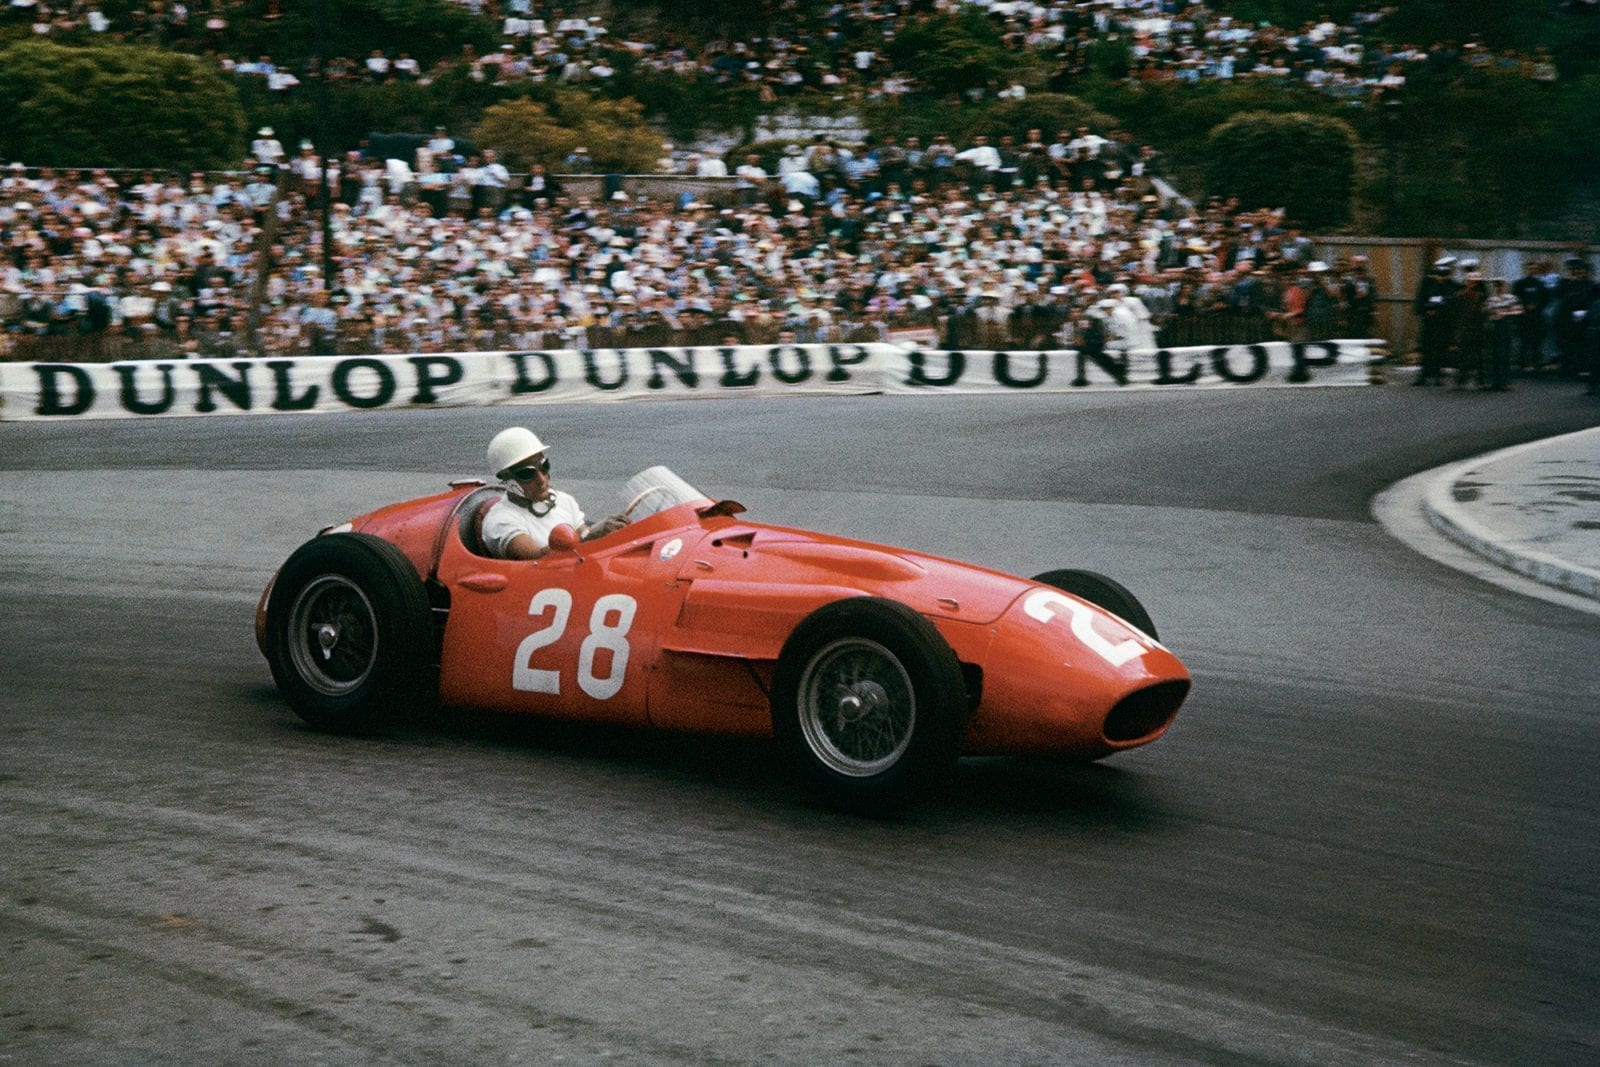 Stirling Moss (Maserati 250F), on his way to victory at the 1956 Monaco Grand Prix.